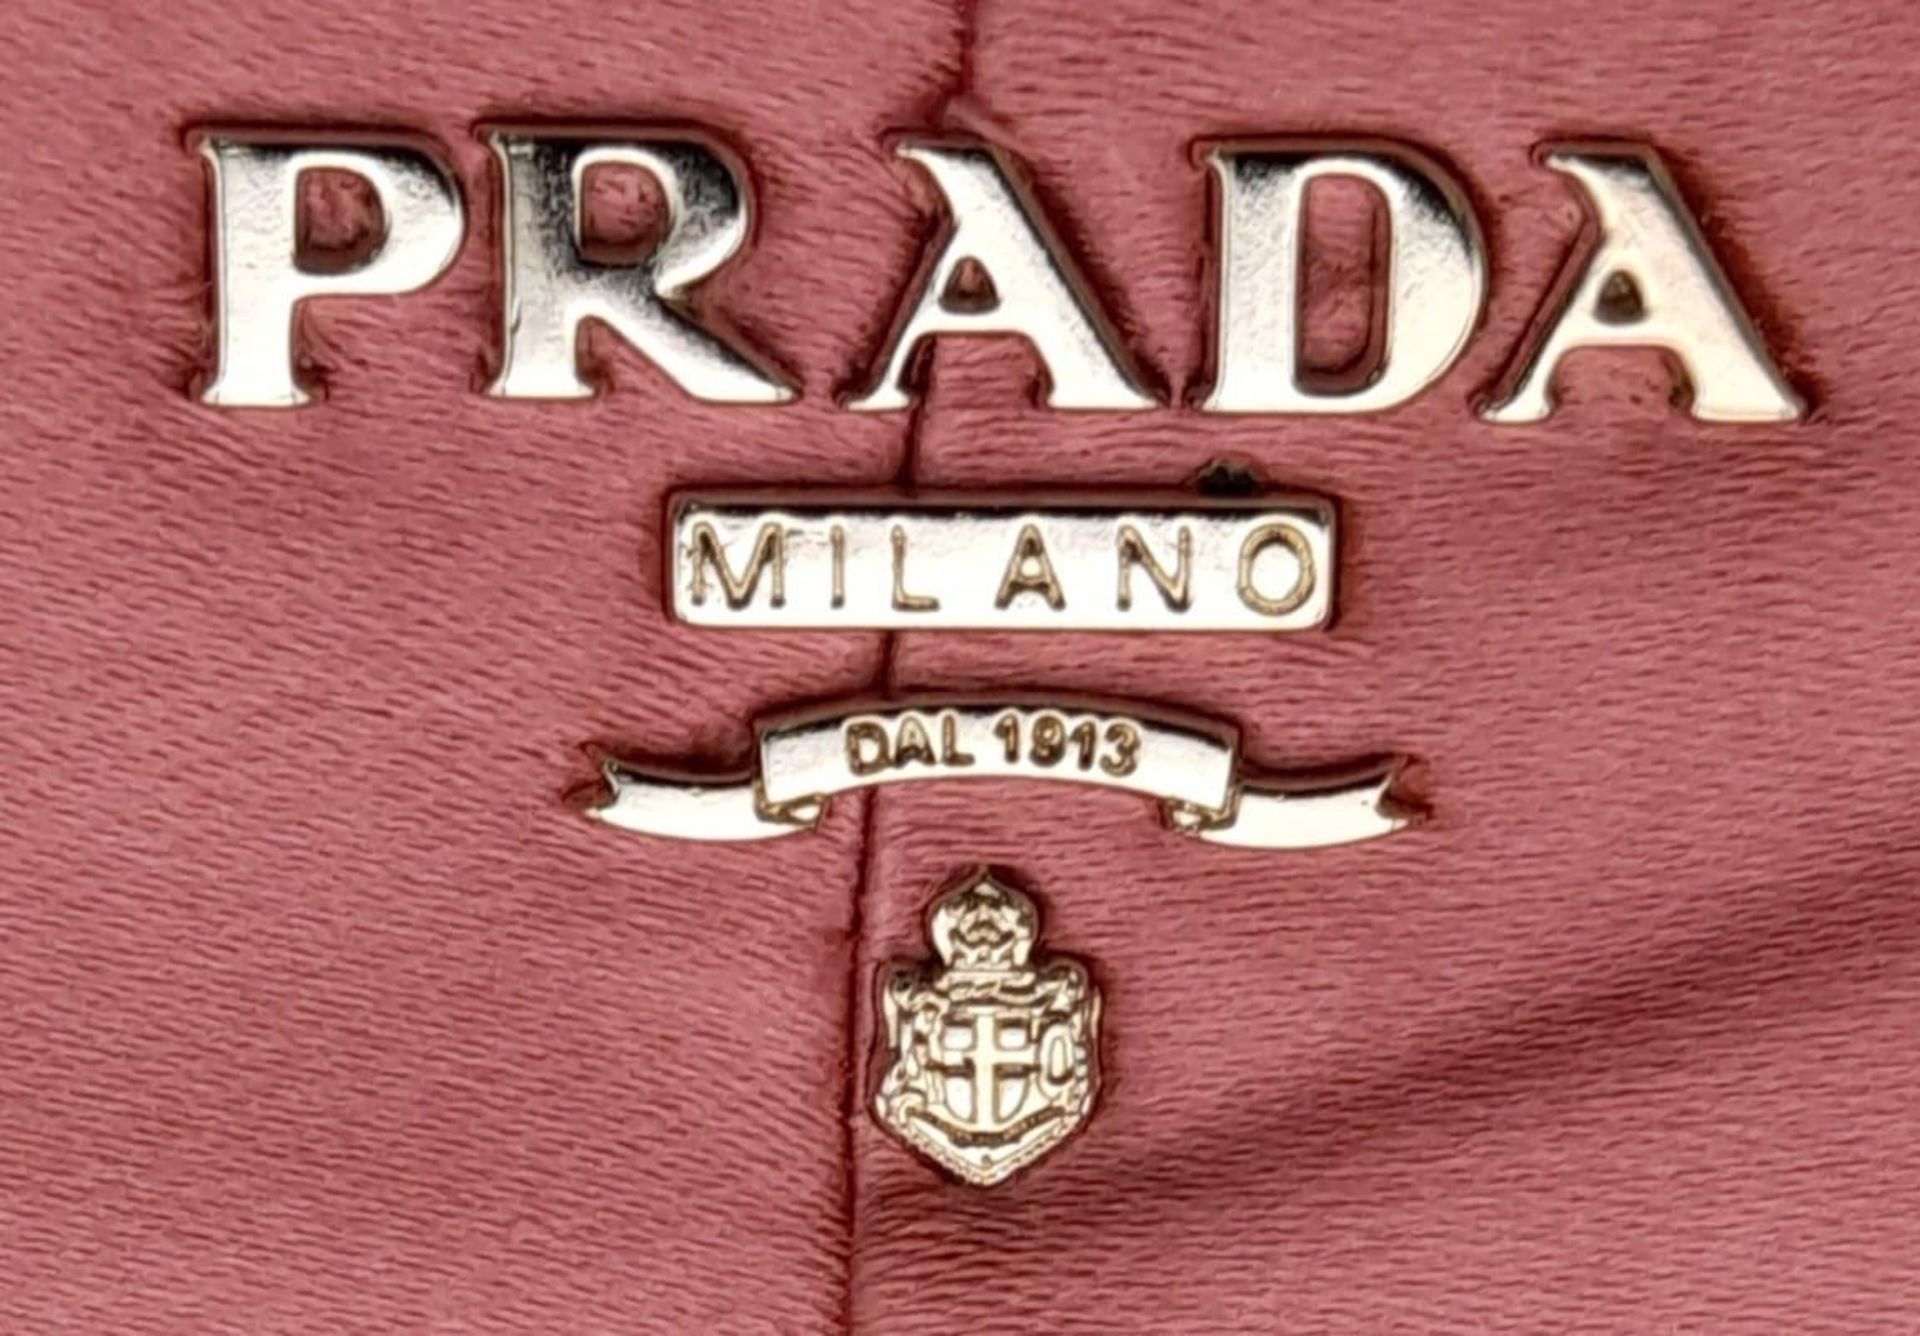 A Prada Pink Pleated Clutch Bag. Satin exterior with silver-toned hardware and press lock closure to - Bild 8 aus 9